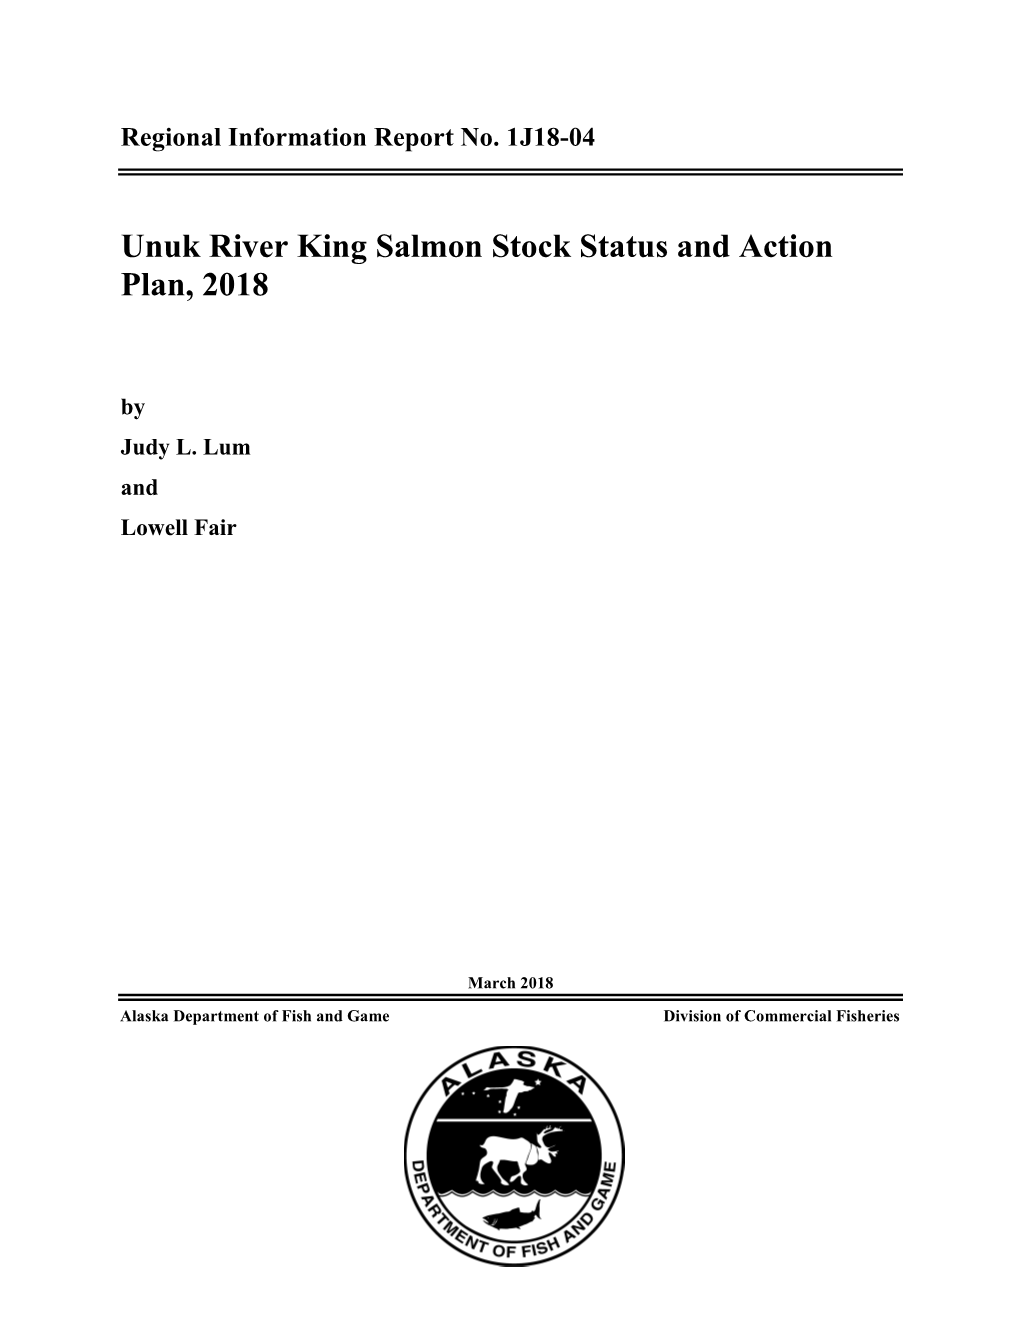 Unuk River King Salmon Stock Status and Action Plan, 2018. Alaska Department of Fish and Game, Regional Information Report No